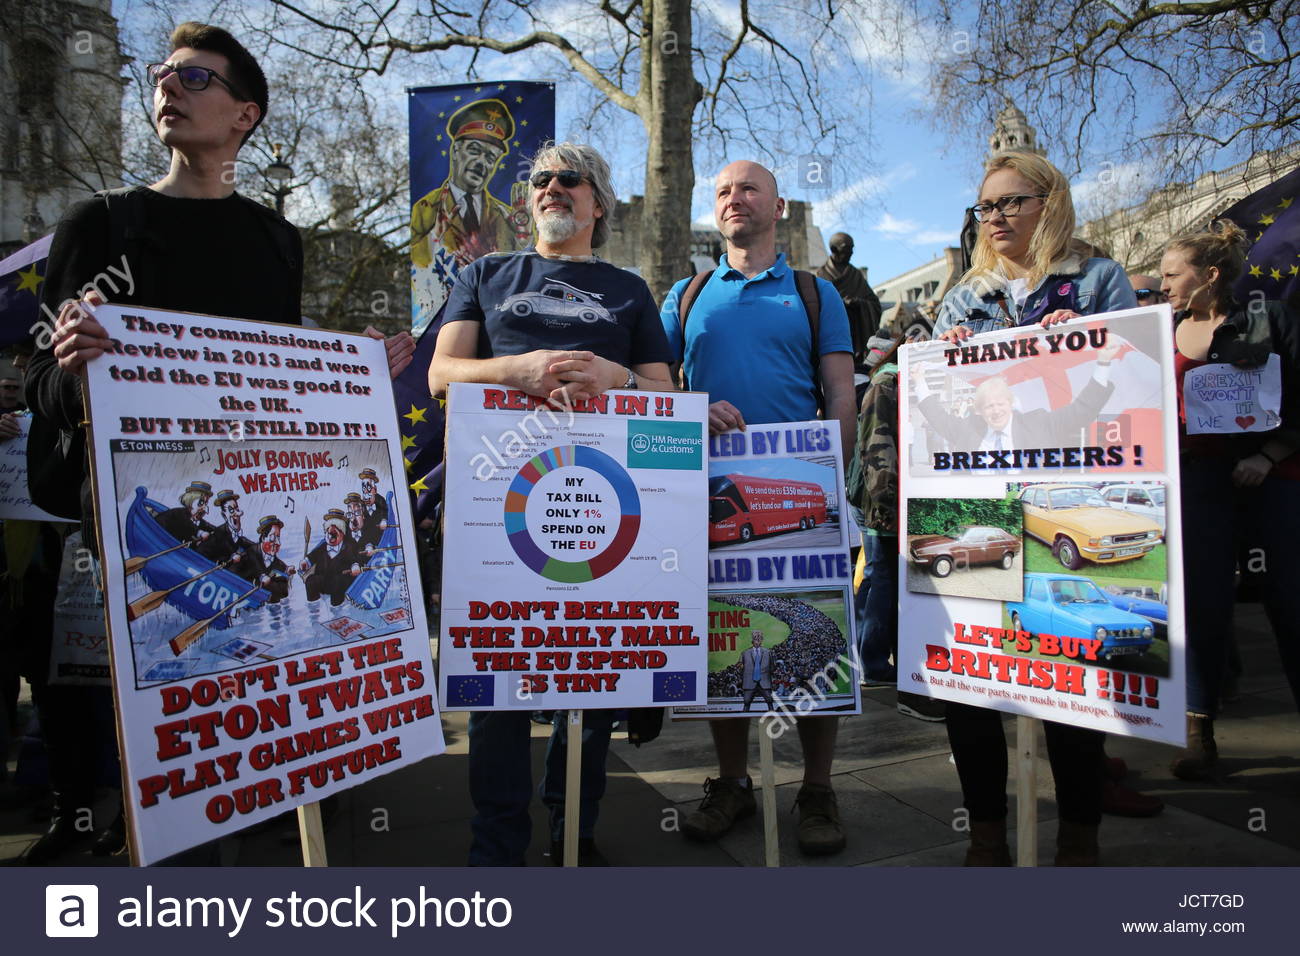 Participants in a pro-EU rally at Westminster listen to an anti-Brexit speech. Stock Photo